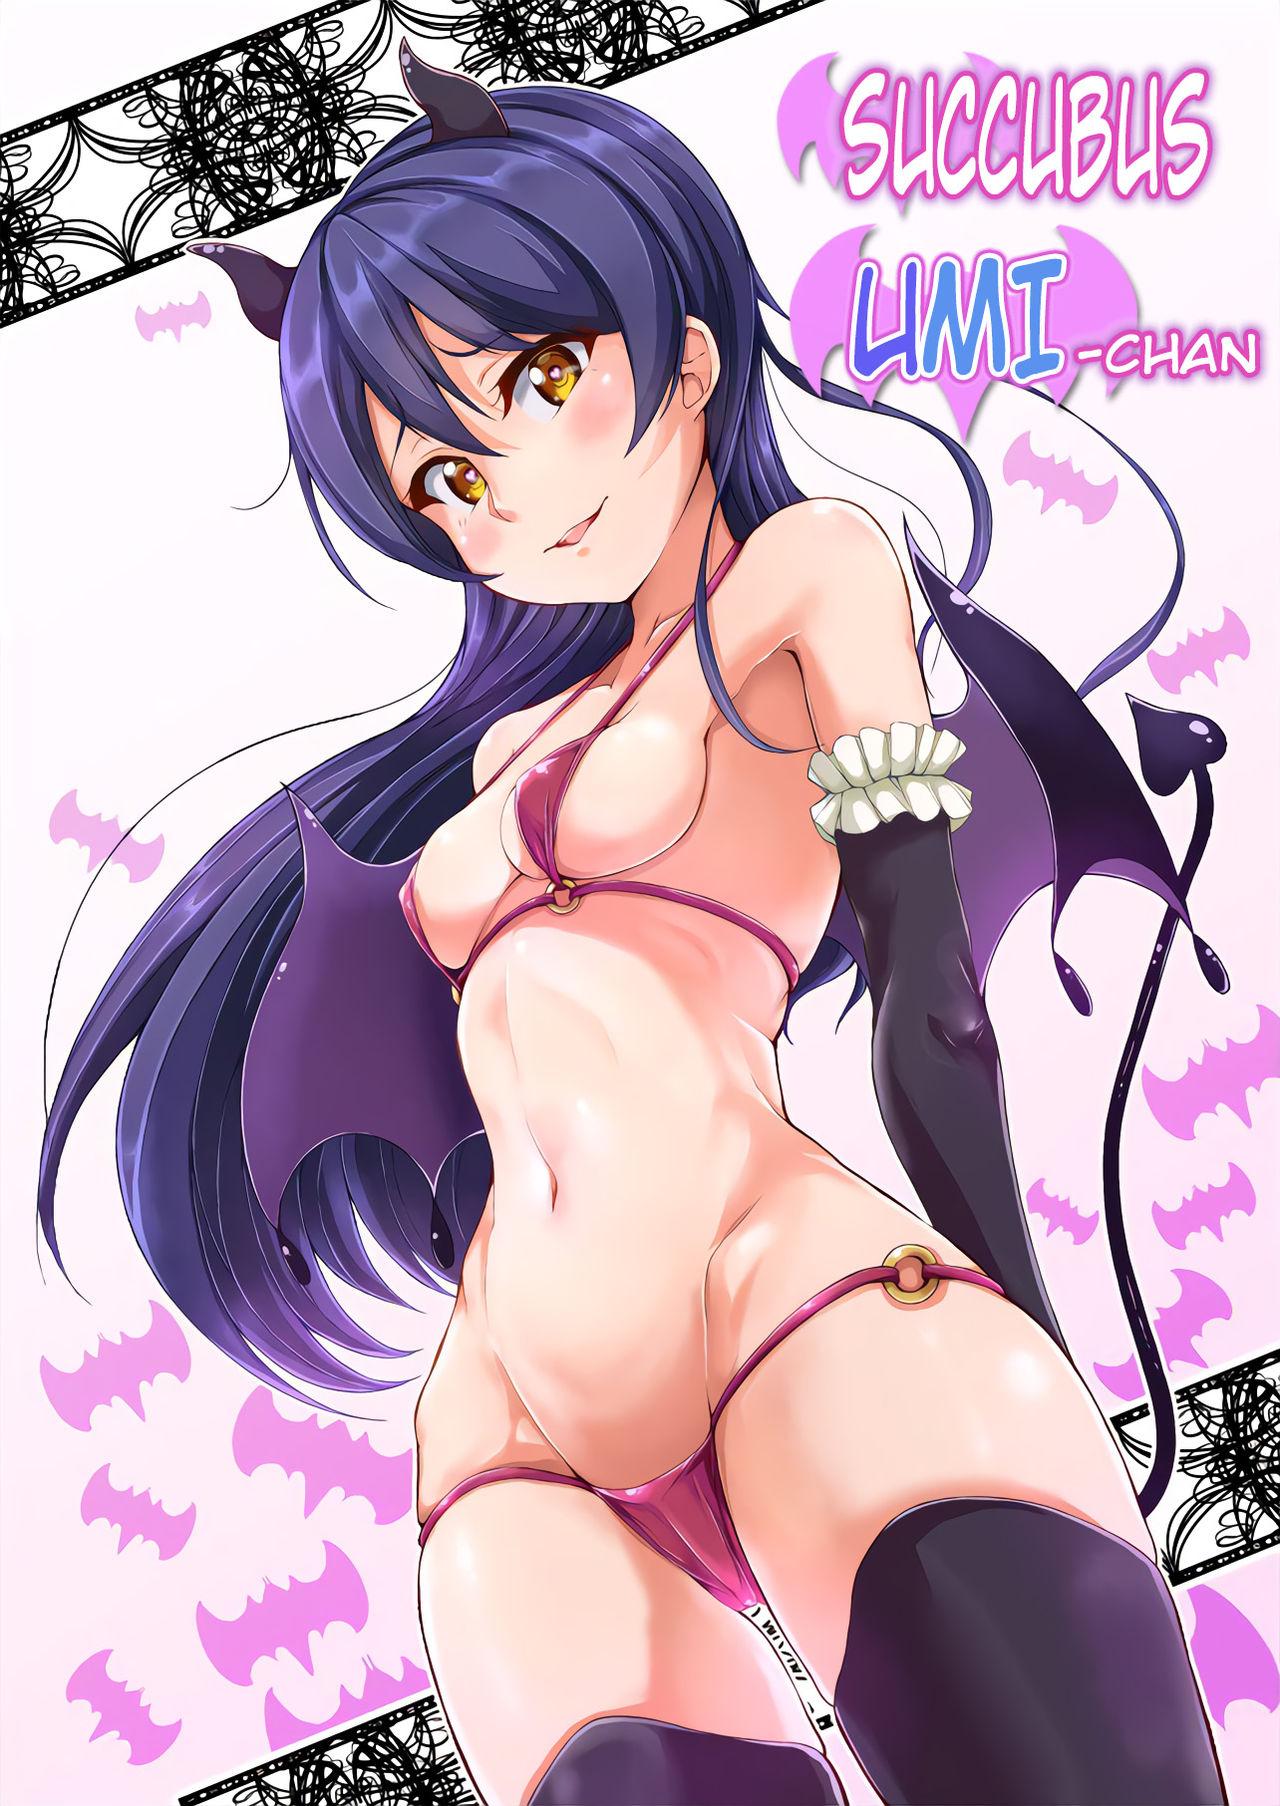 Oldyoung Succubus Umi-chan - Love live Oldman - Page 1